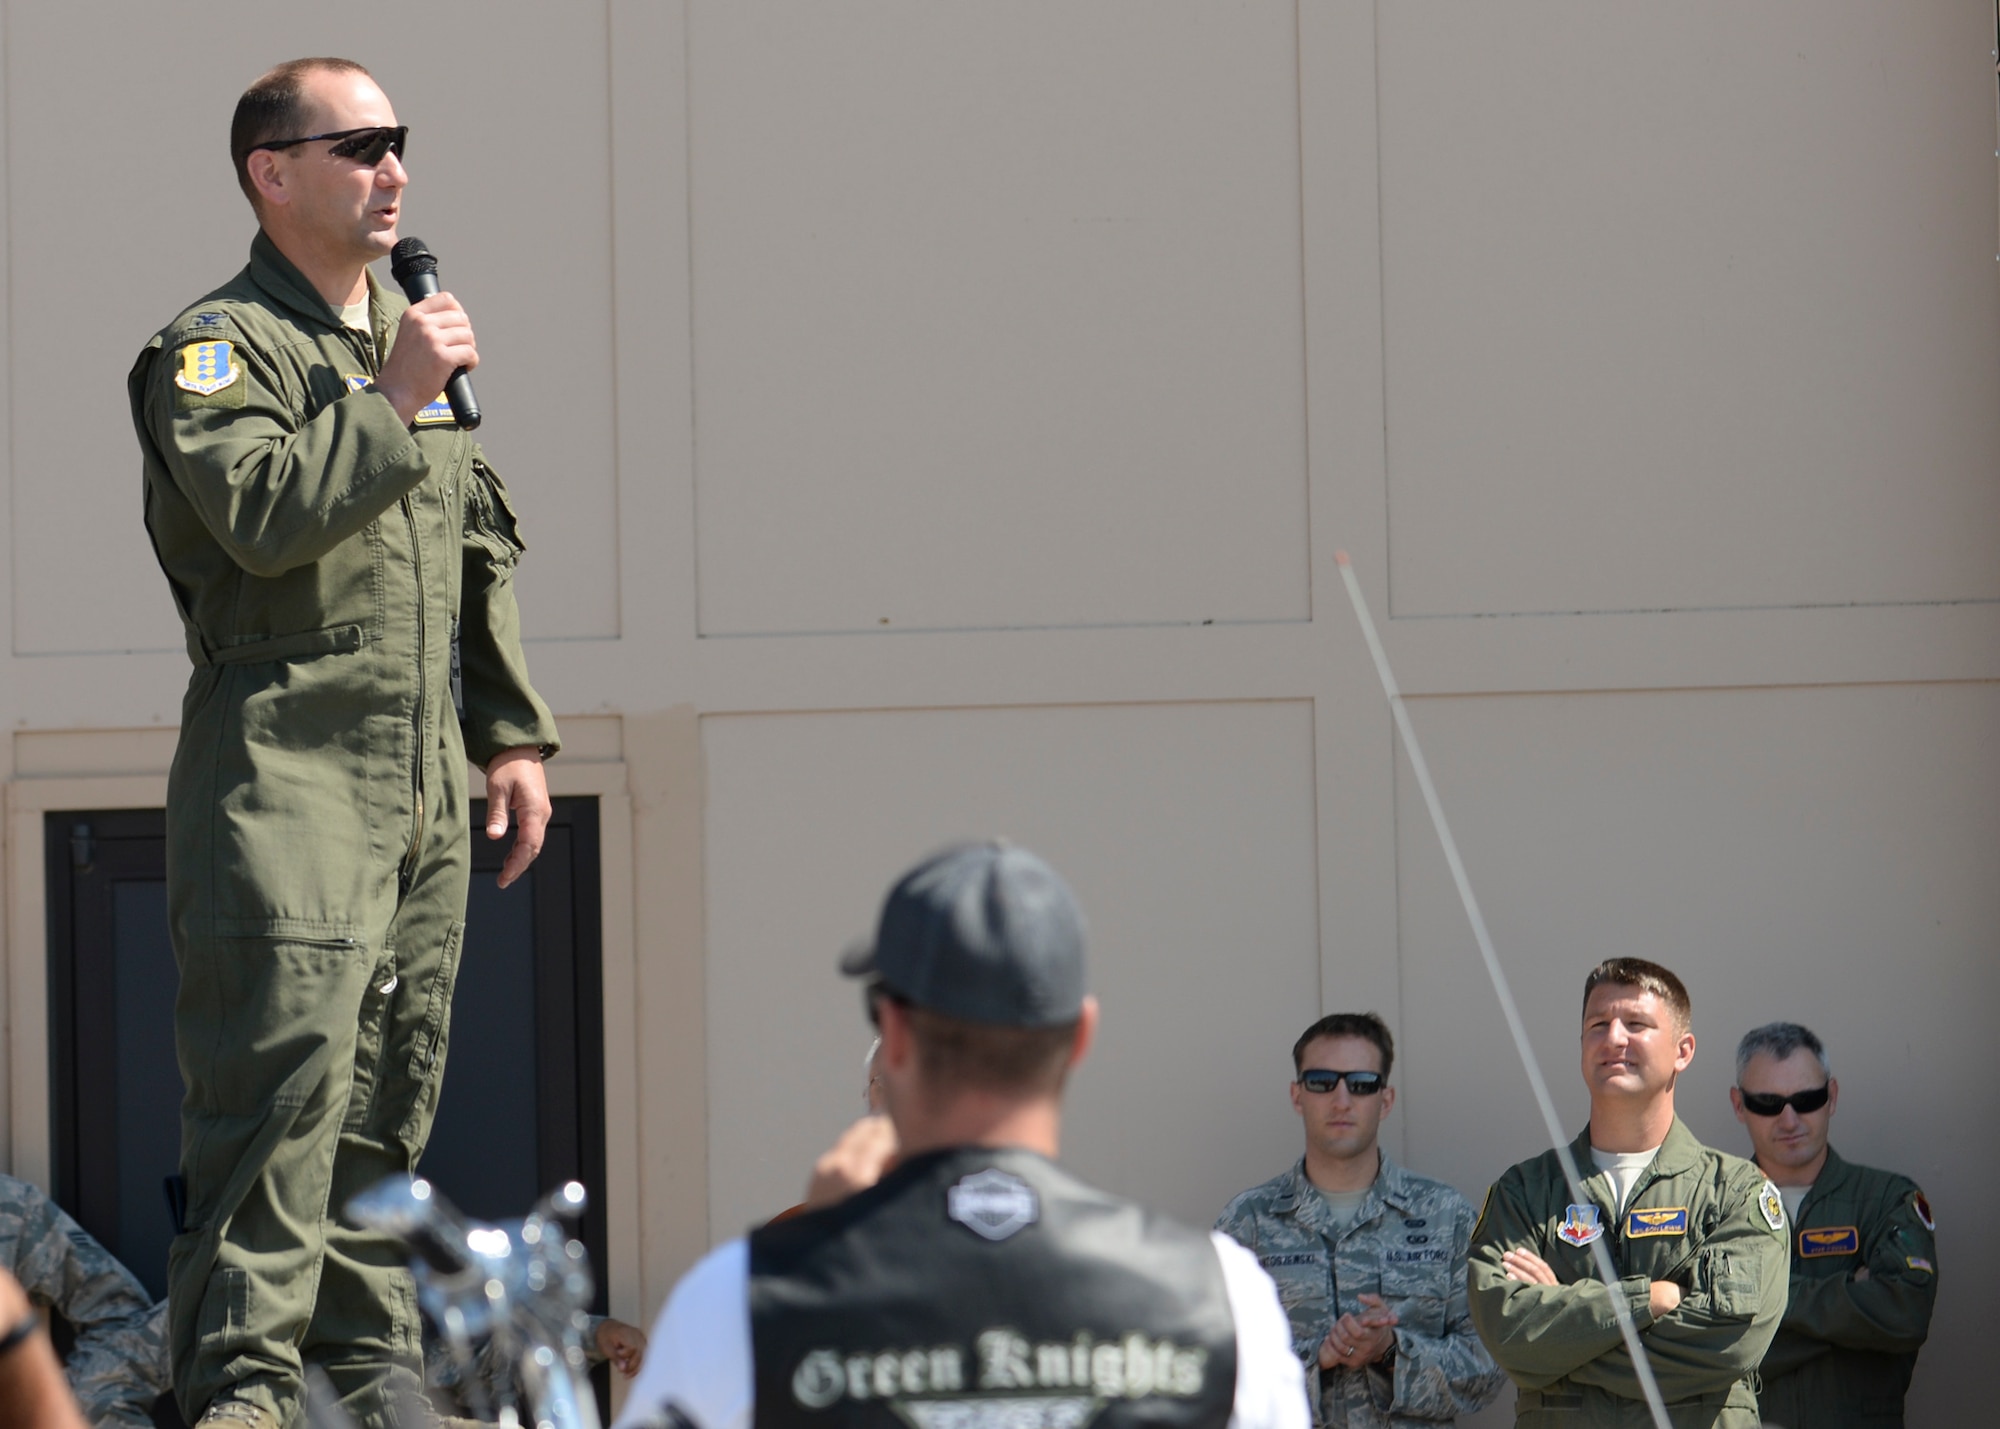 Col. Gentry Boswell, 28th Bomb Wing commander, kicks off the 16th Annual Dakota Thunder Run outside the Pride Hanger at Ellsworth Air Force Base, S.D., Aug. 9, 2016. Hosted by the Green Knights Dakota Thunder Motorcycle Club, the run is comprised of Airmen, family members and civilian motorcyclists who ride together from Ellsworth AFB through the Black Hills ending in Sturgis where a ceremony is conducted to honor military veterans. (U.S. Air Force photo by Senior Airman Anania Tekurio/Released)